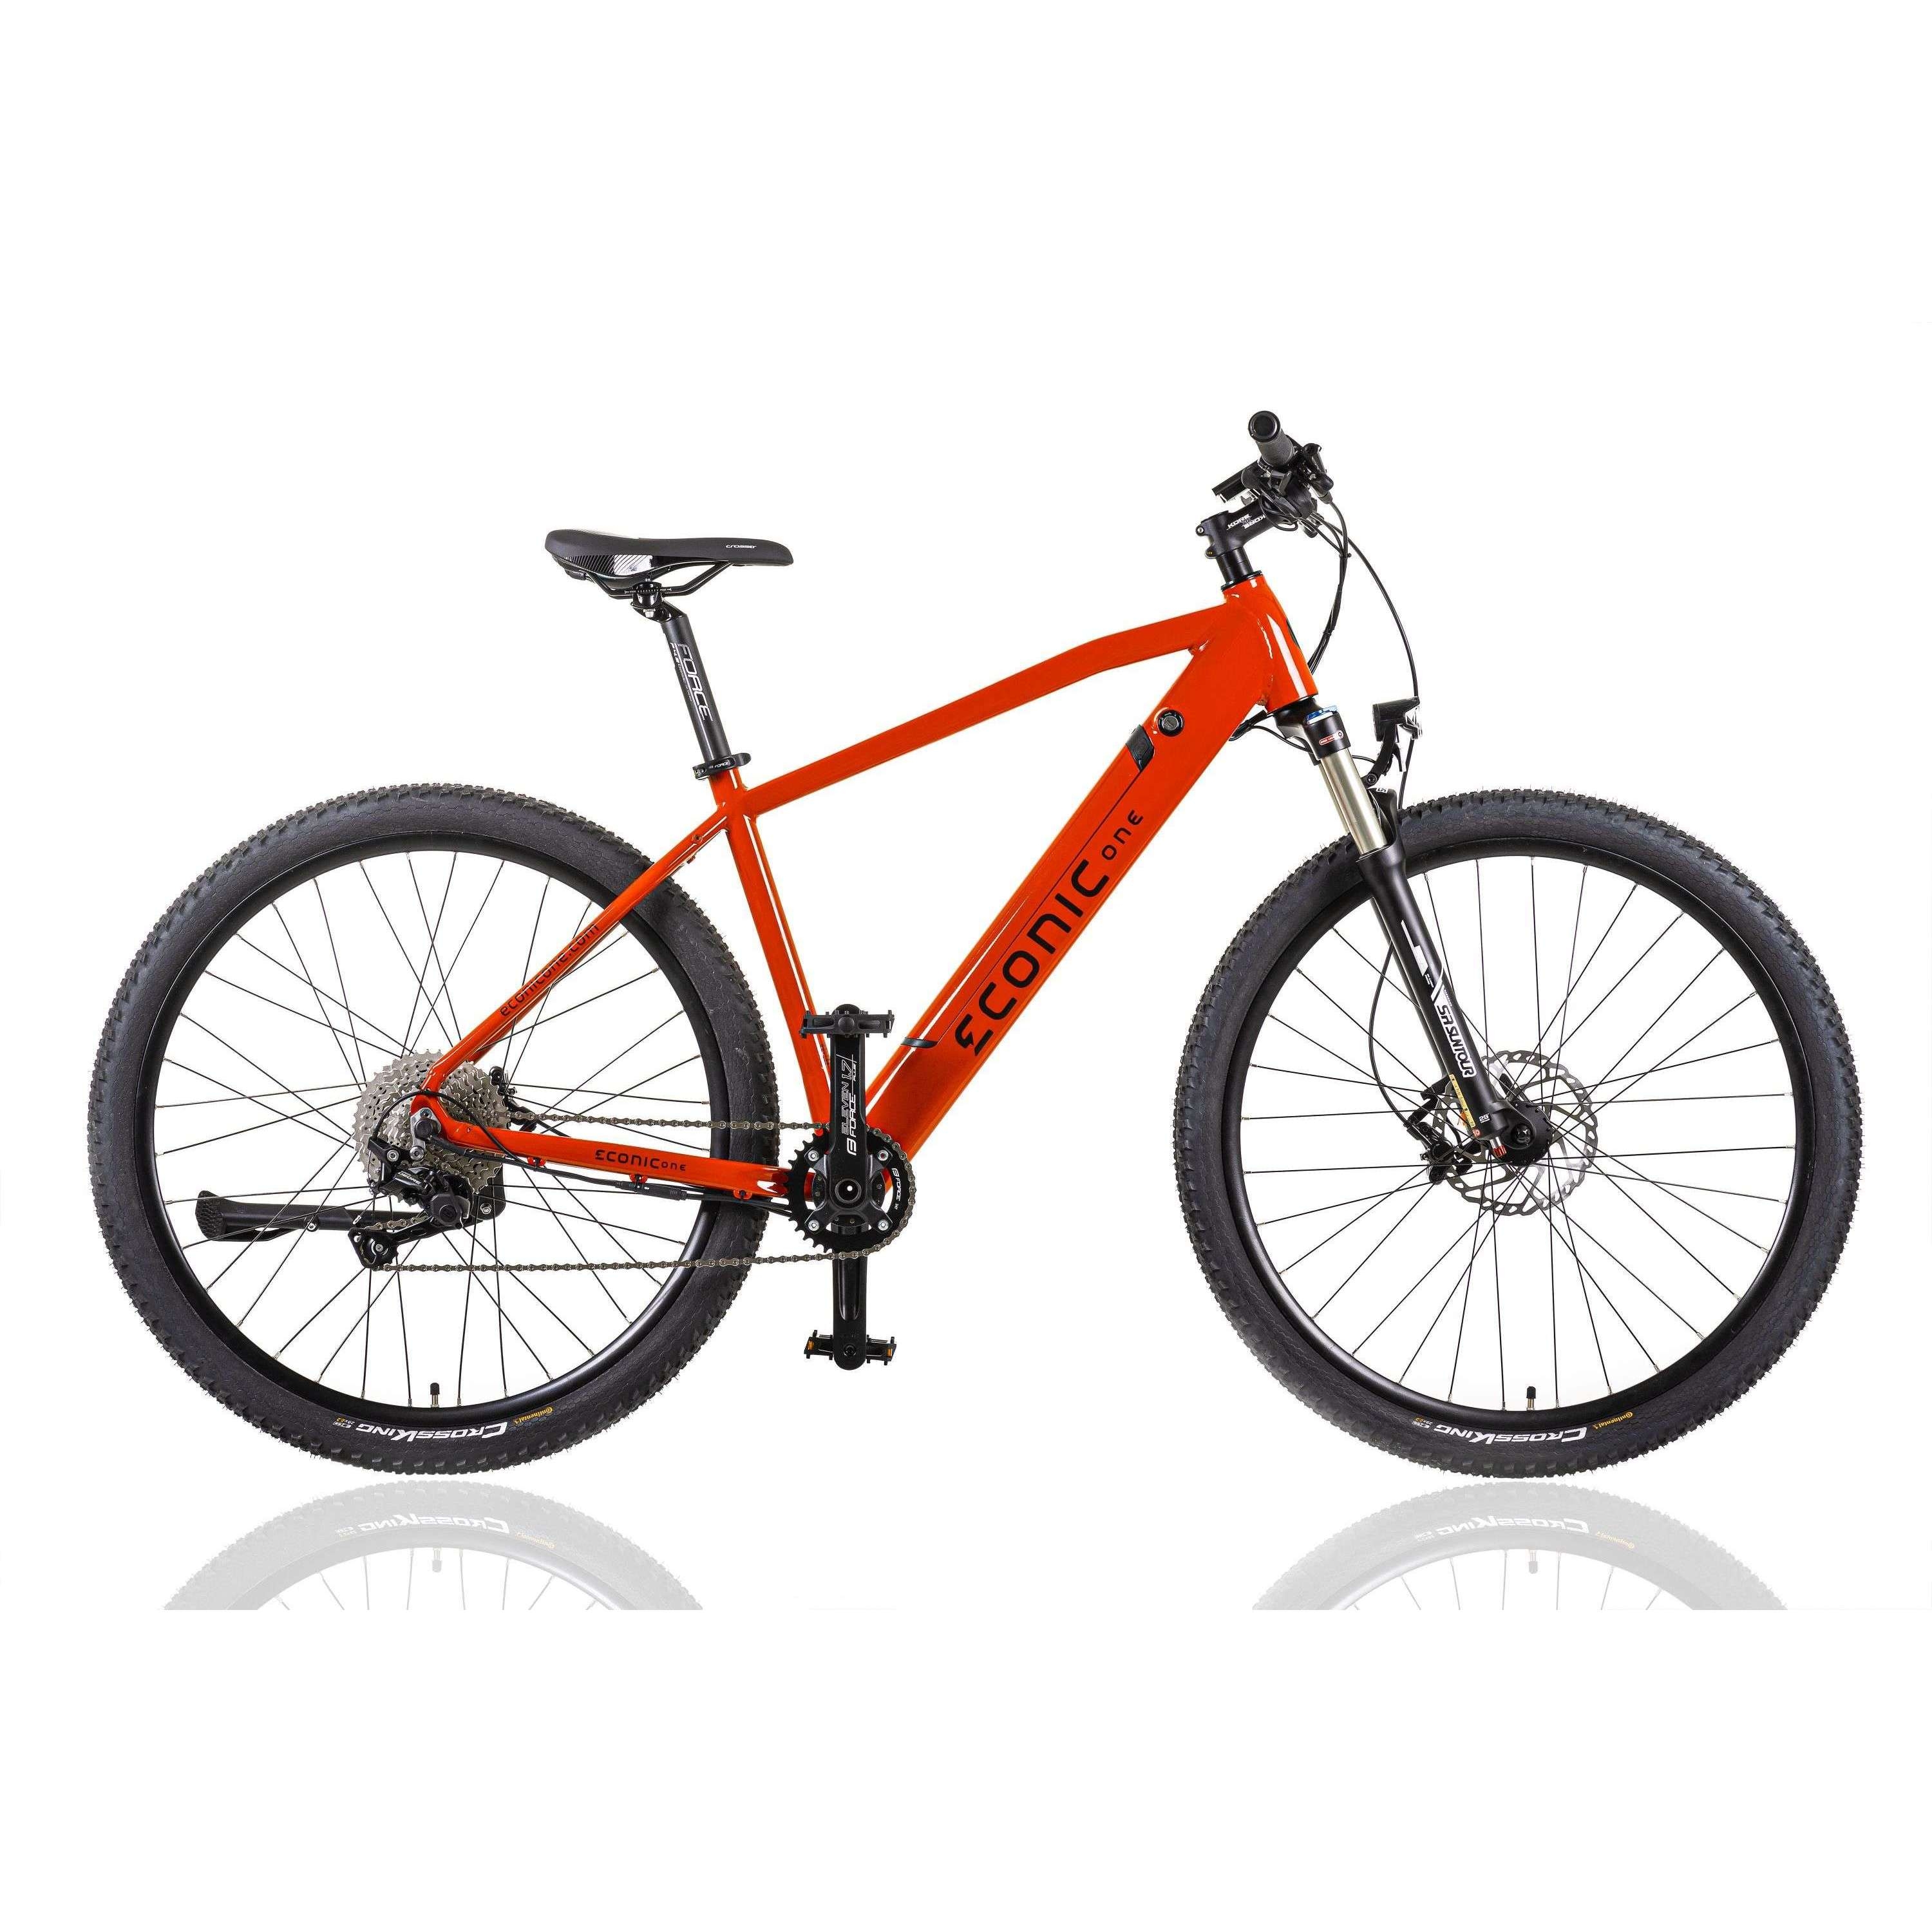 Econic One Cross-Country EMTB E-Mountain Bike 250W, Red / 52cm – Urban Travel